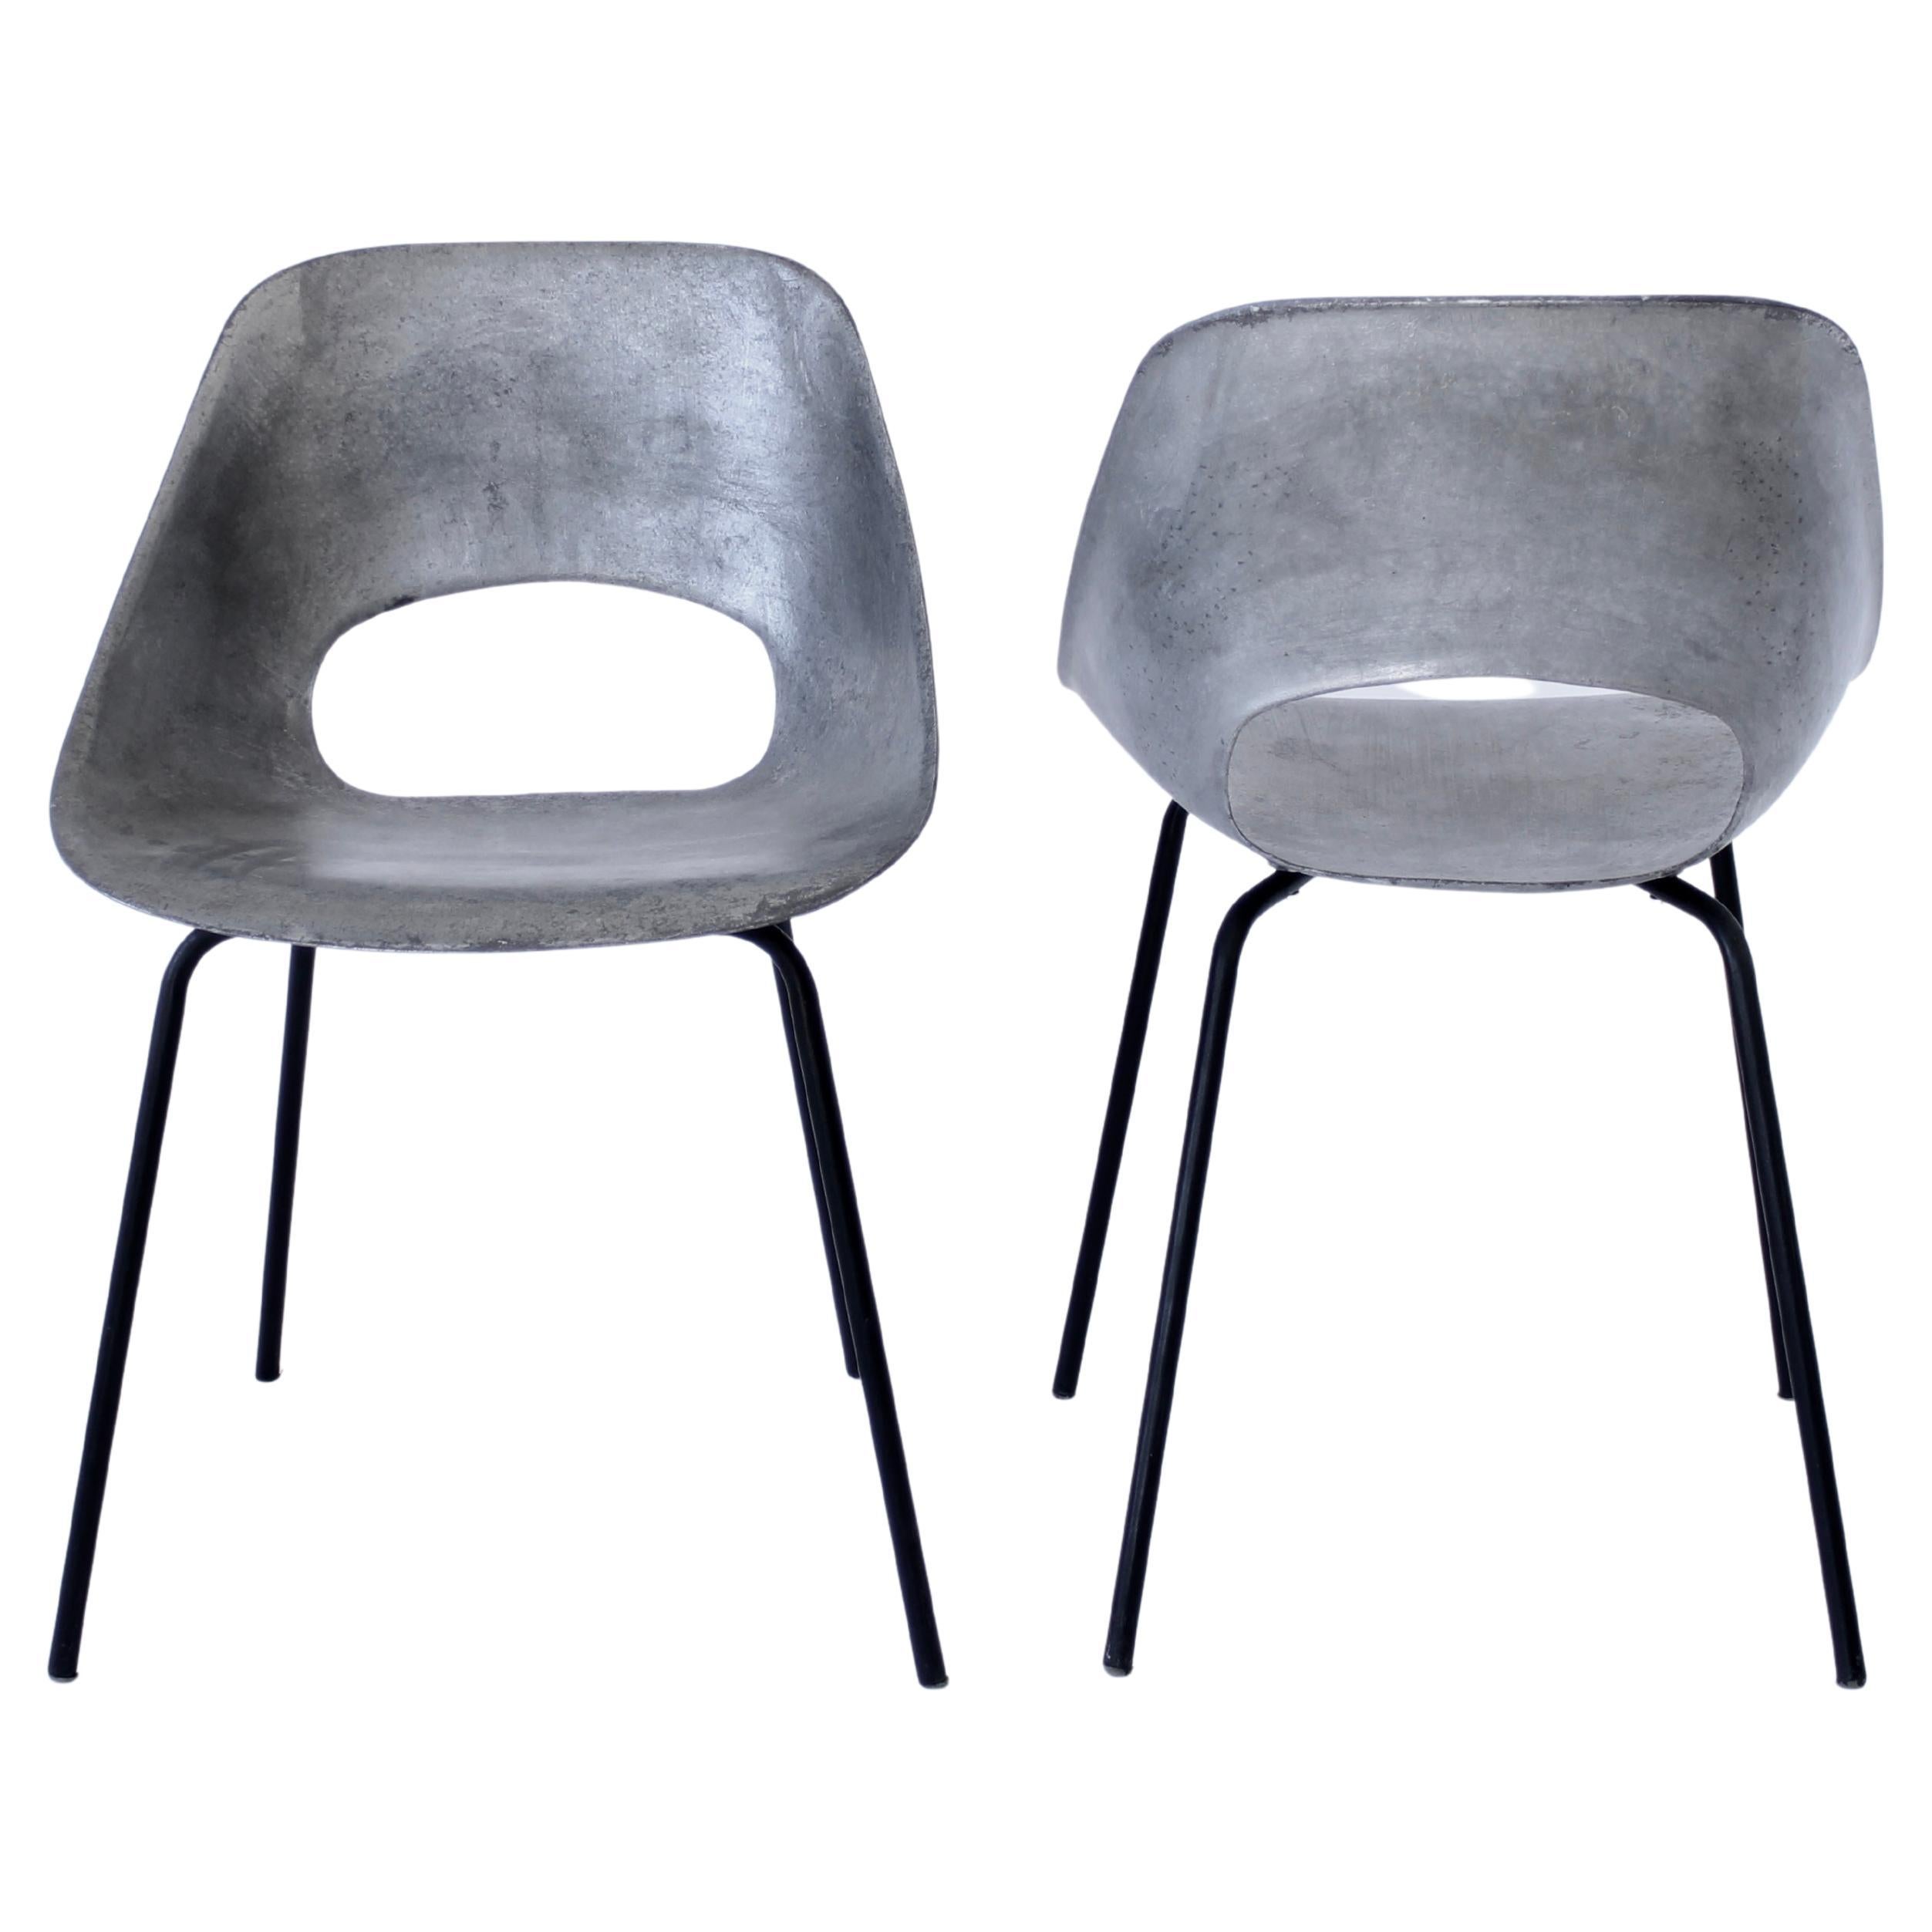 Pierre Guariche Cast Aluminum Pair of Tulip Chairs for Steiner France circa 1954